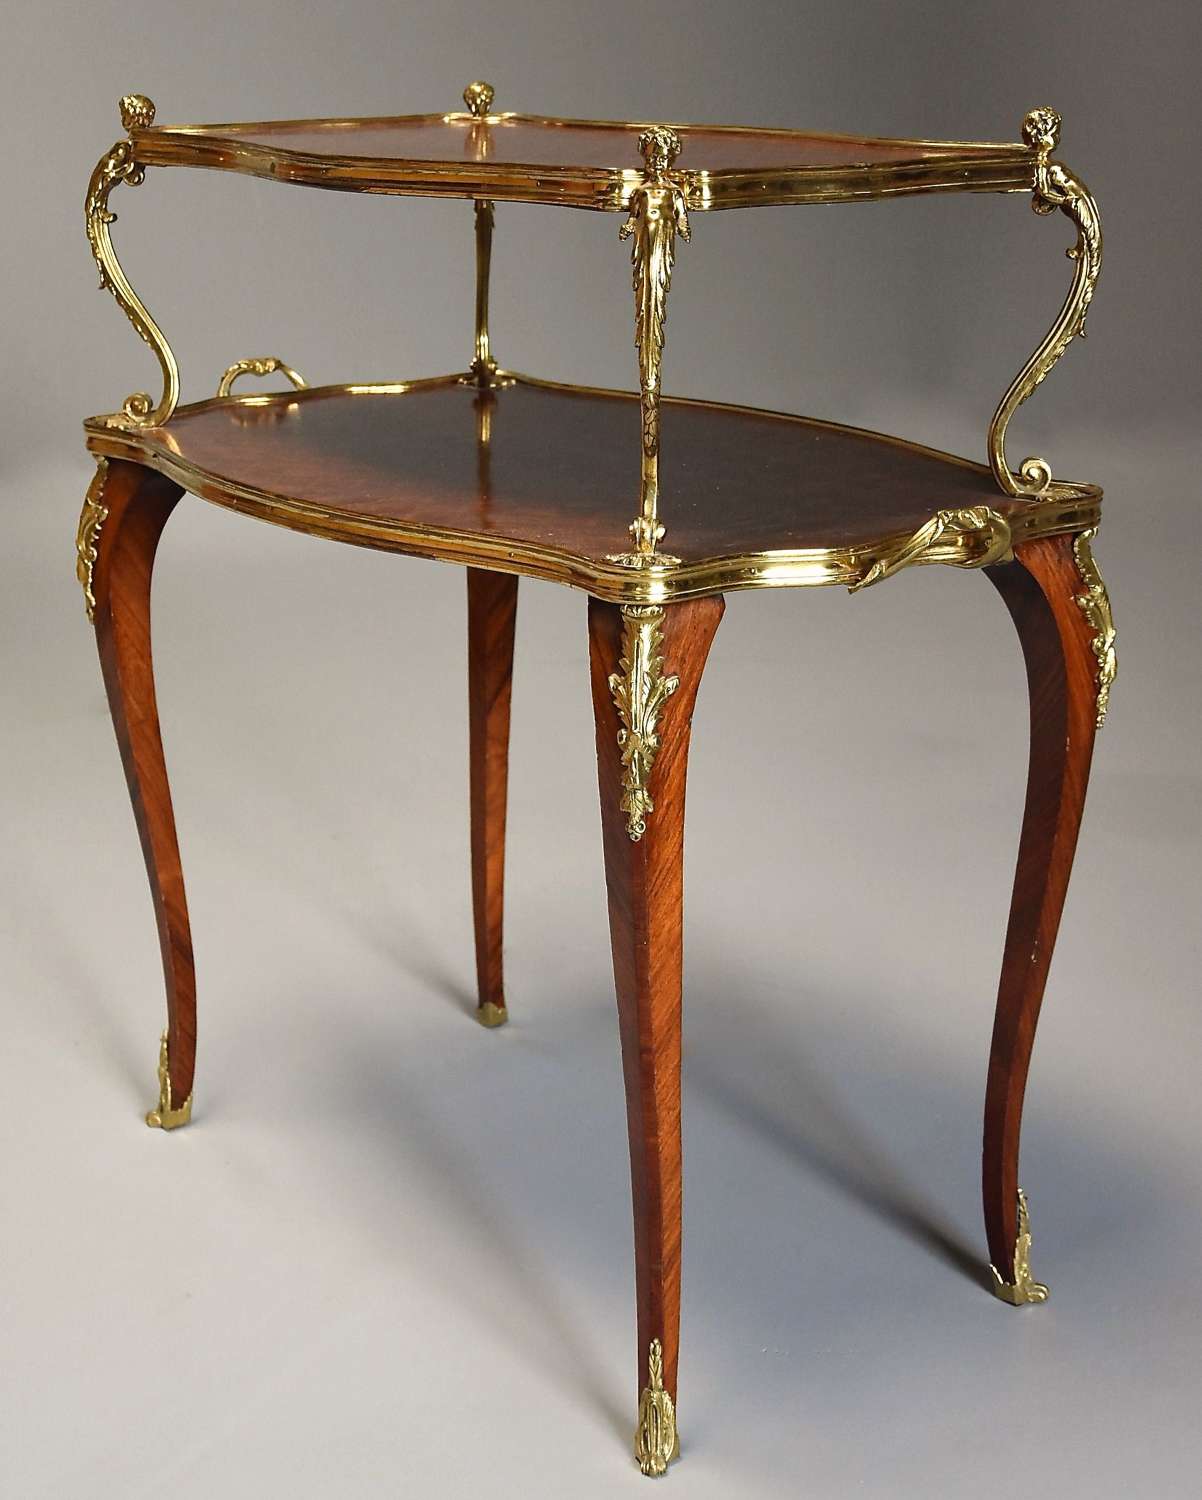 Fine quality French 19th century Kingwood two tier serpentine etagere